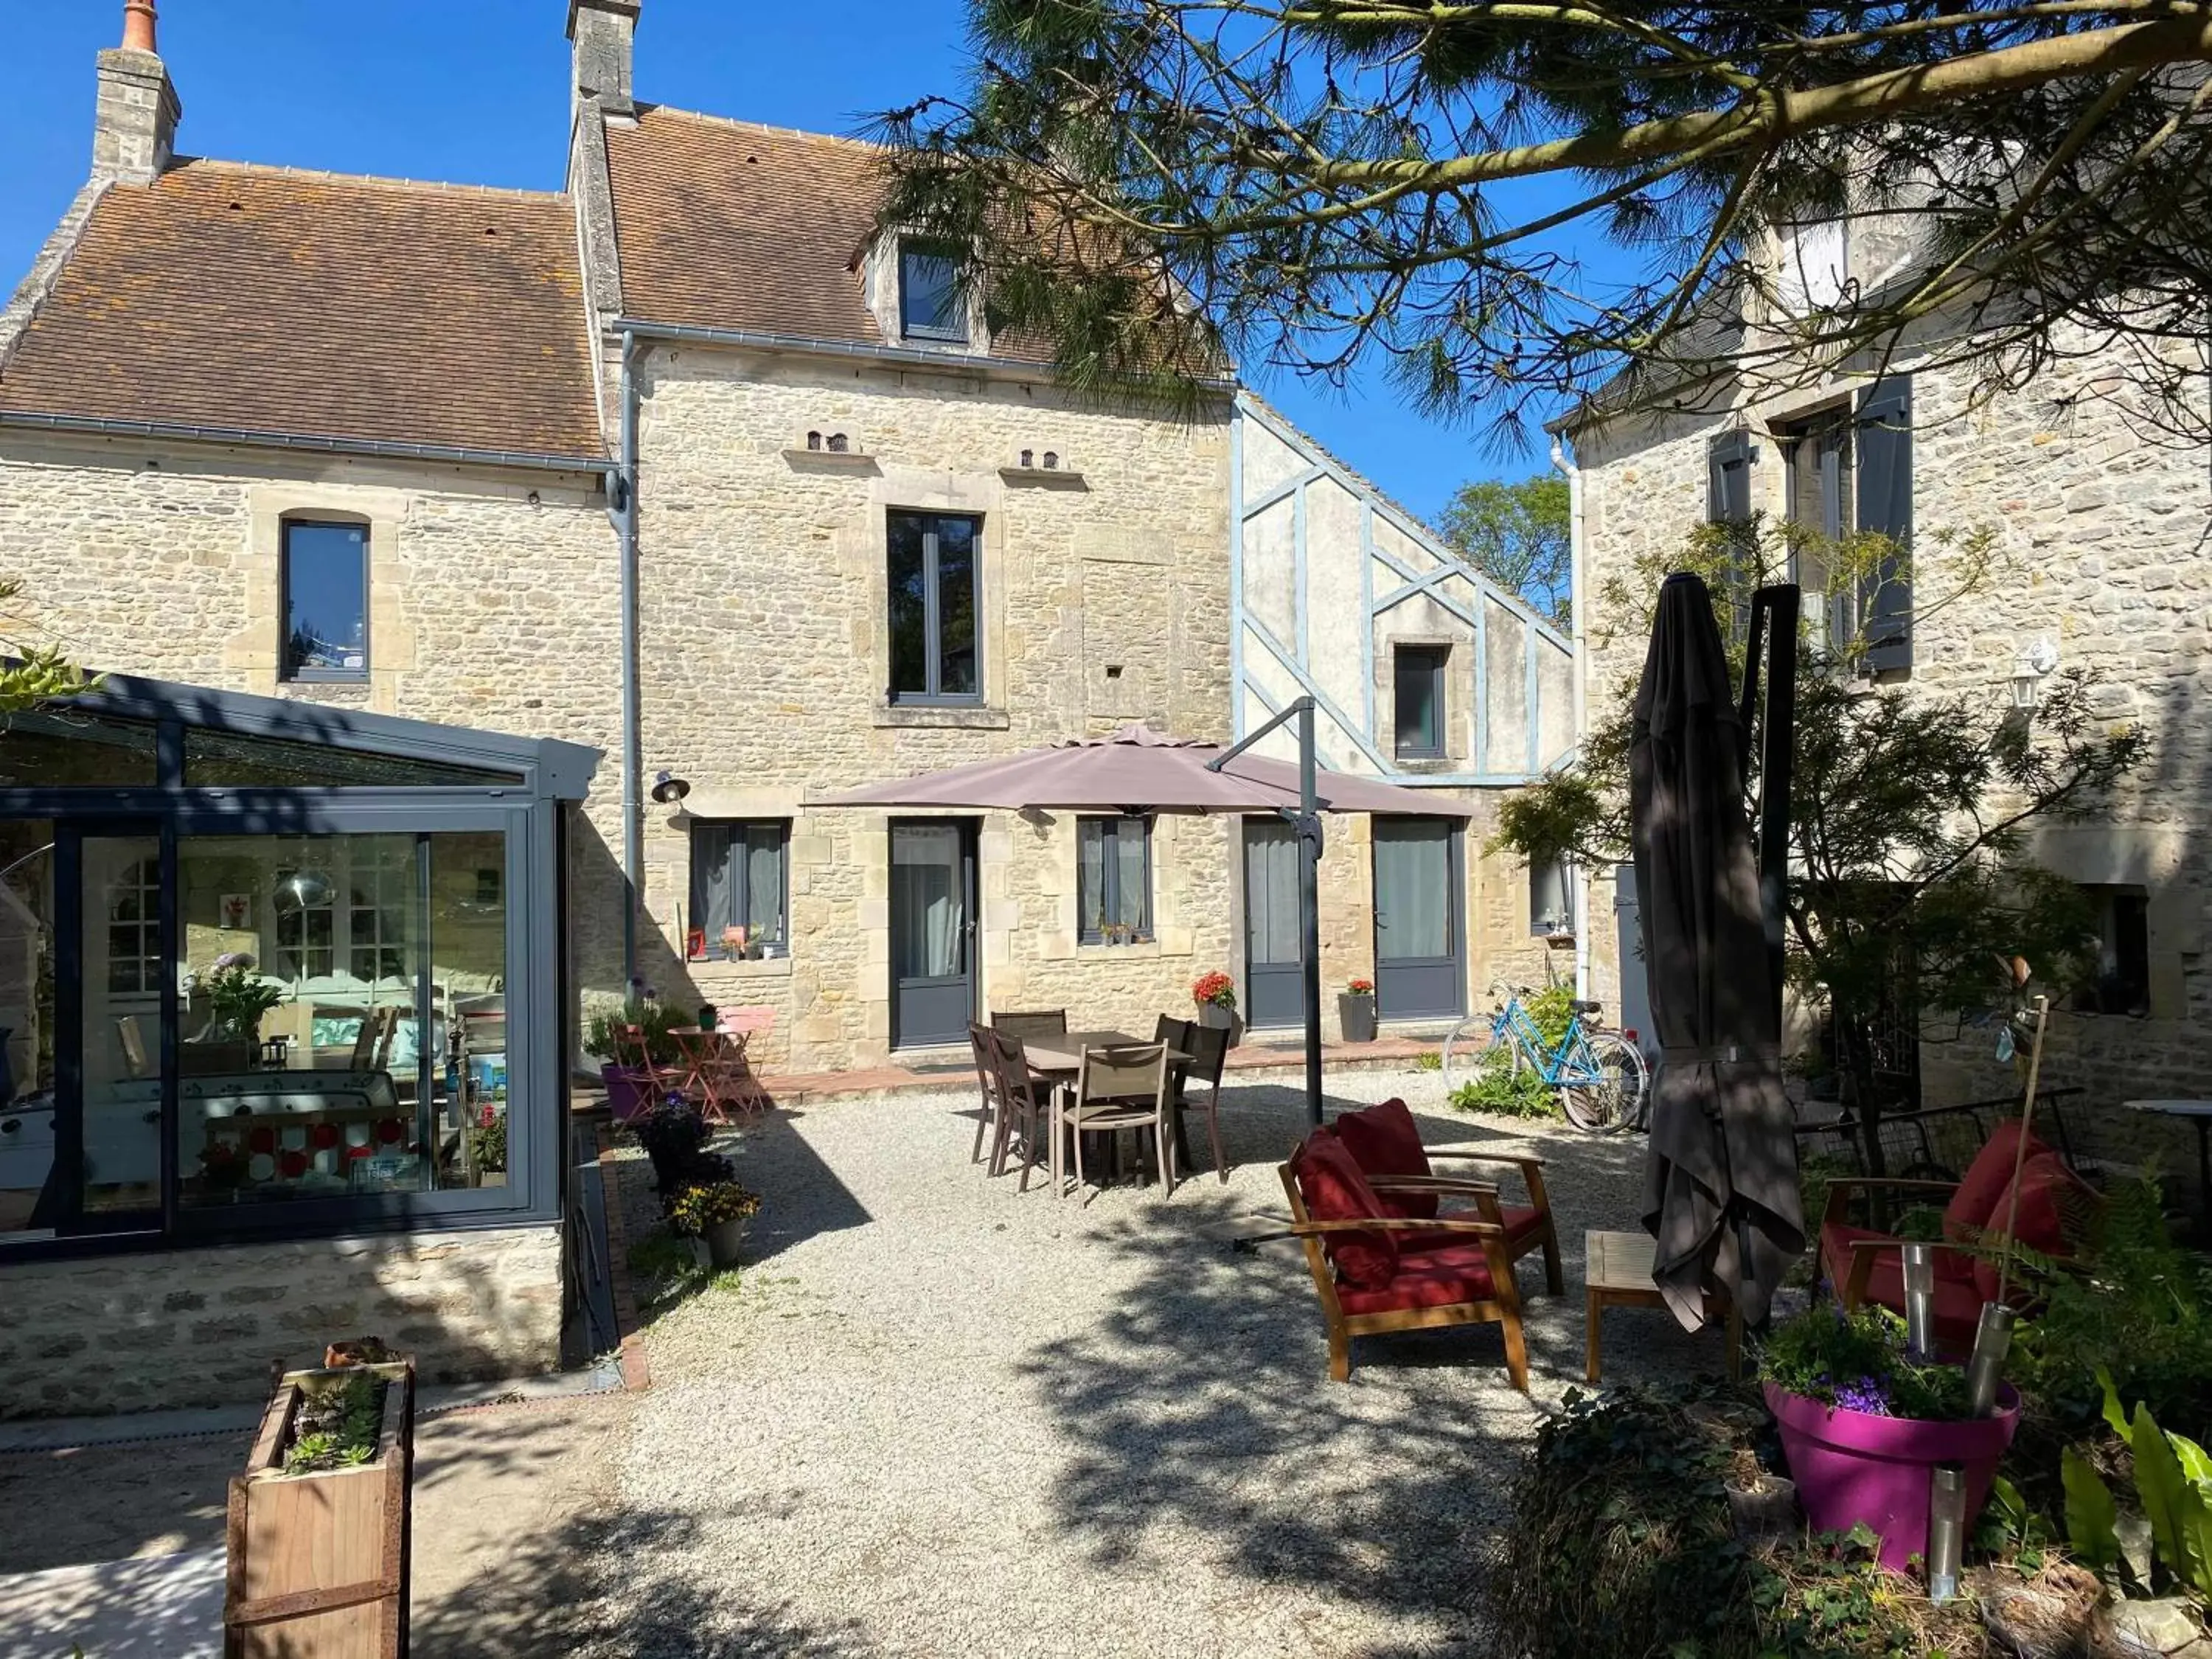 Property building in Le mas Normand